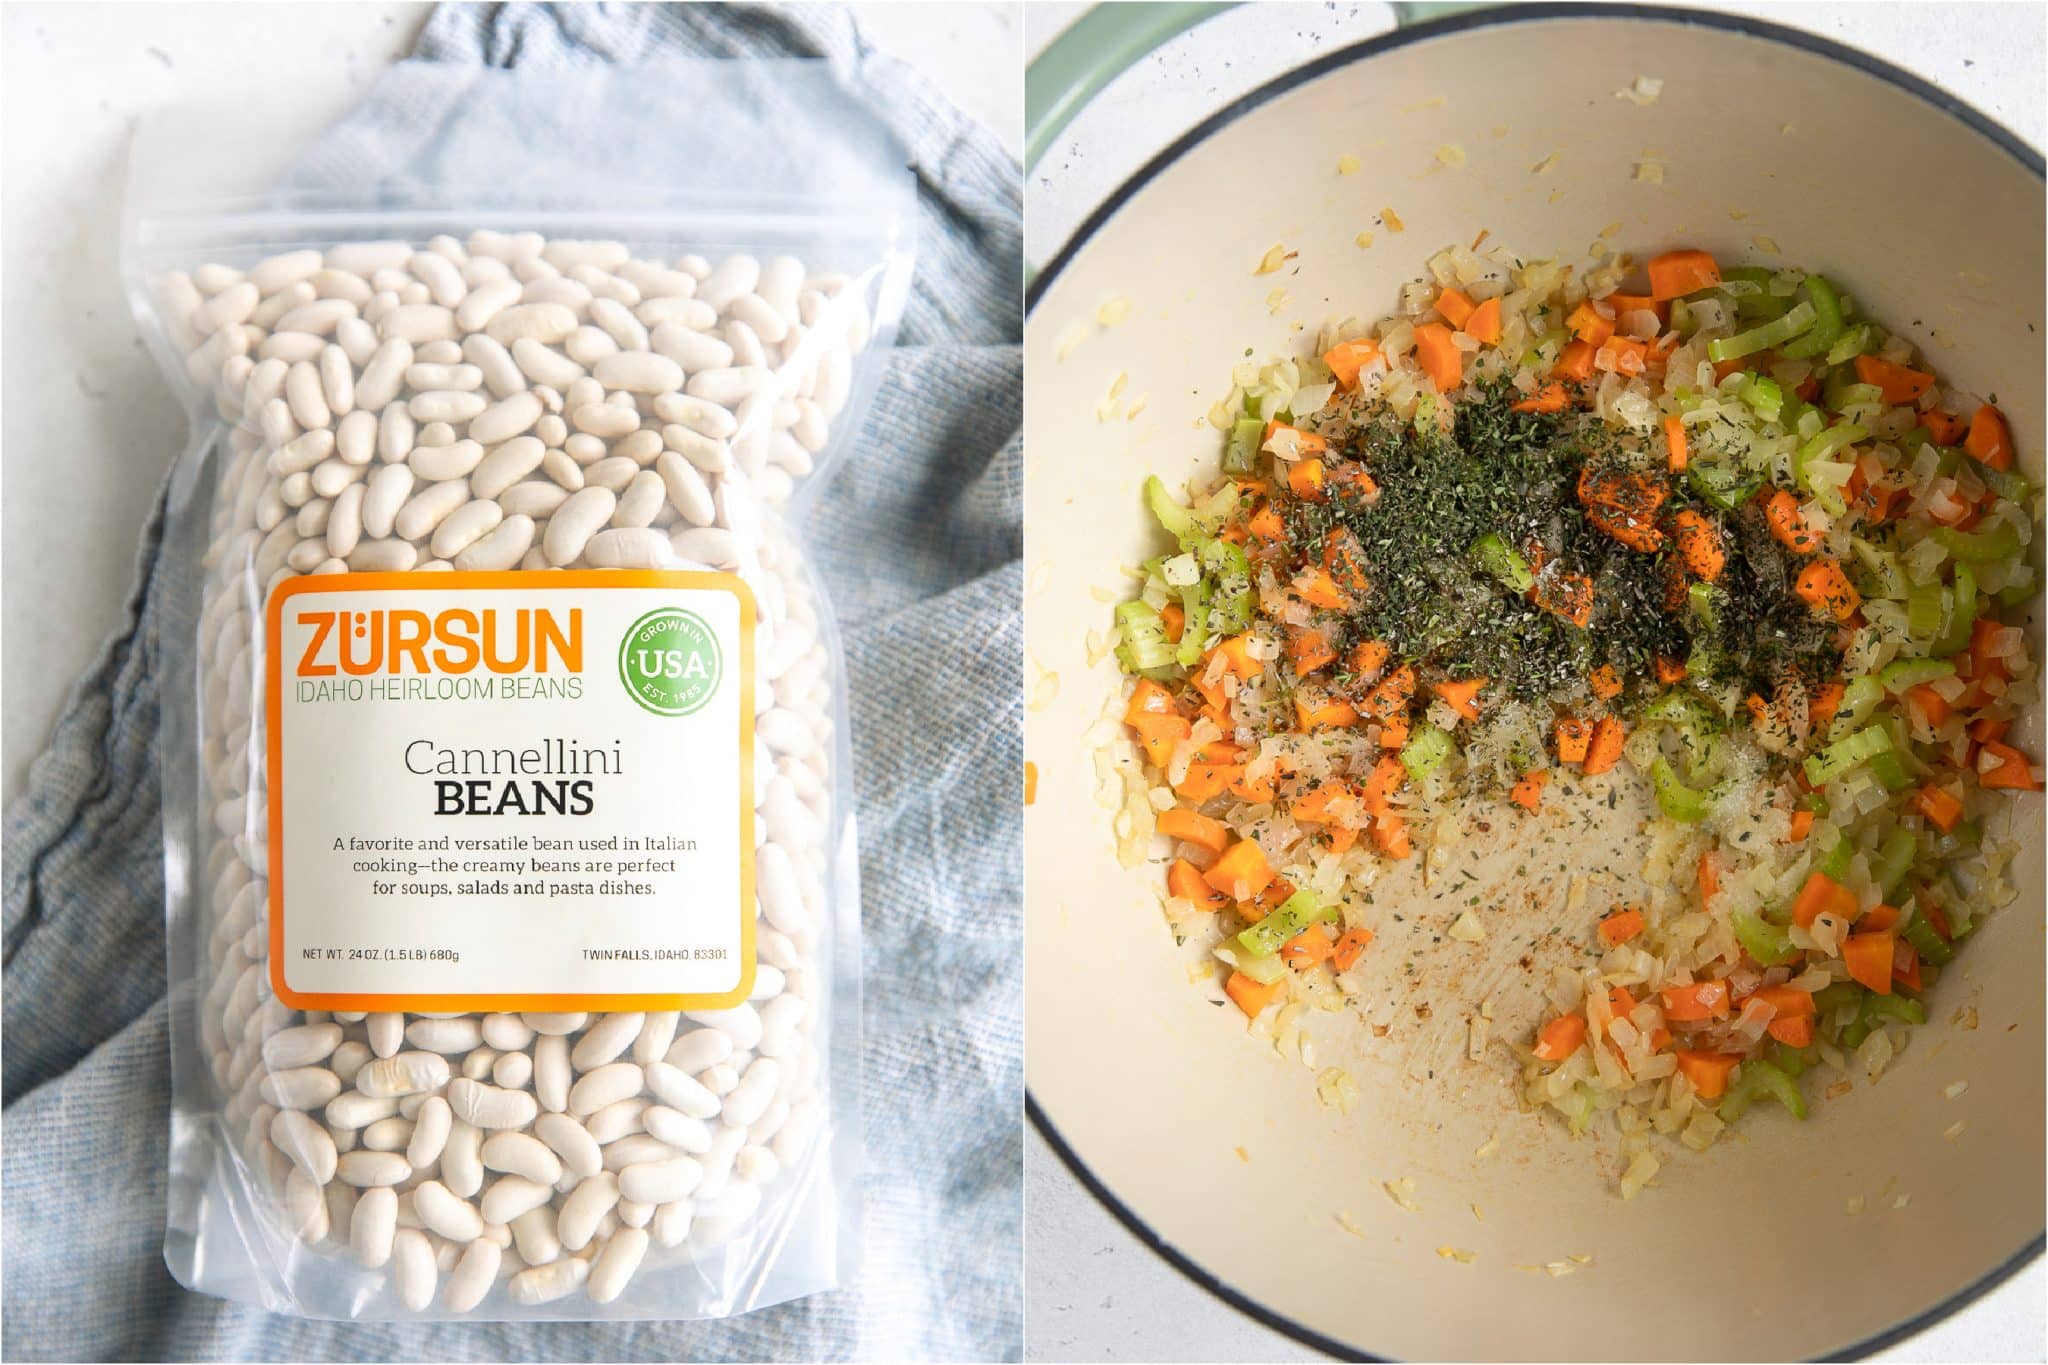 Two pictures side-by-side. The one on the left is an image of a bag of dried cannellini beans and the image on the right is of a large pot filled with cooking onions, carrots, and celery with minced rosemary and thyme.